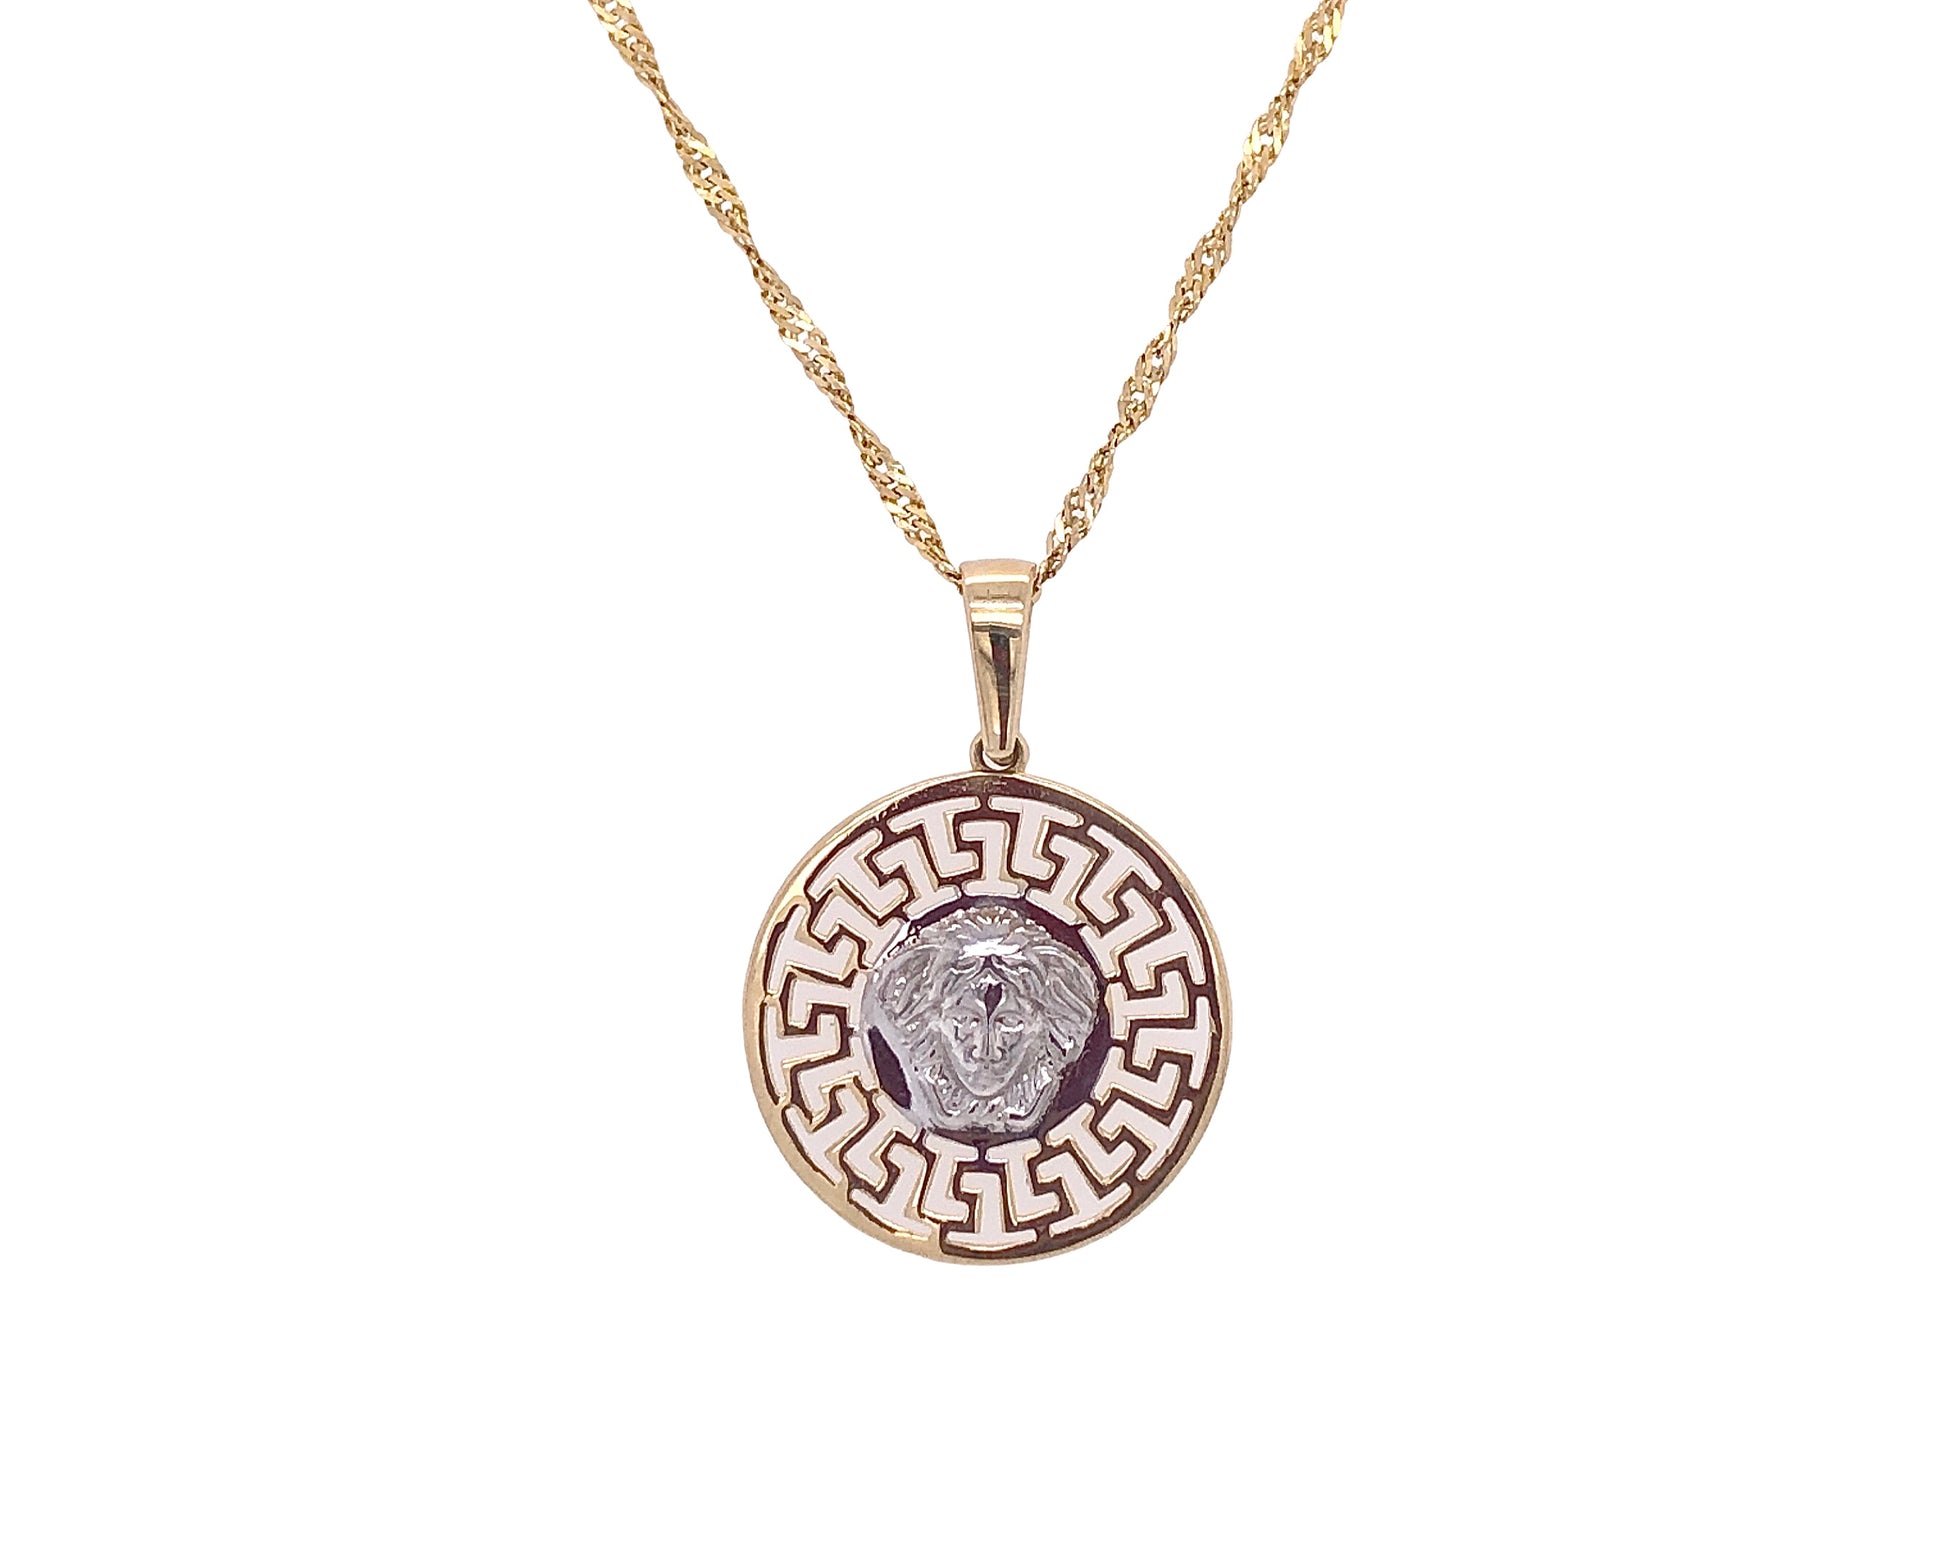 Versace-style pendant with chain 